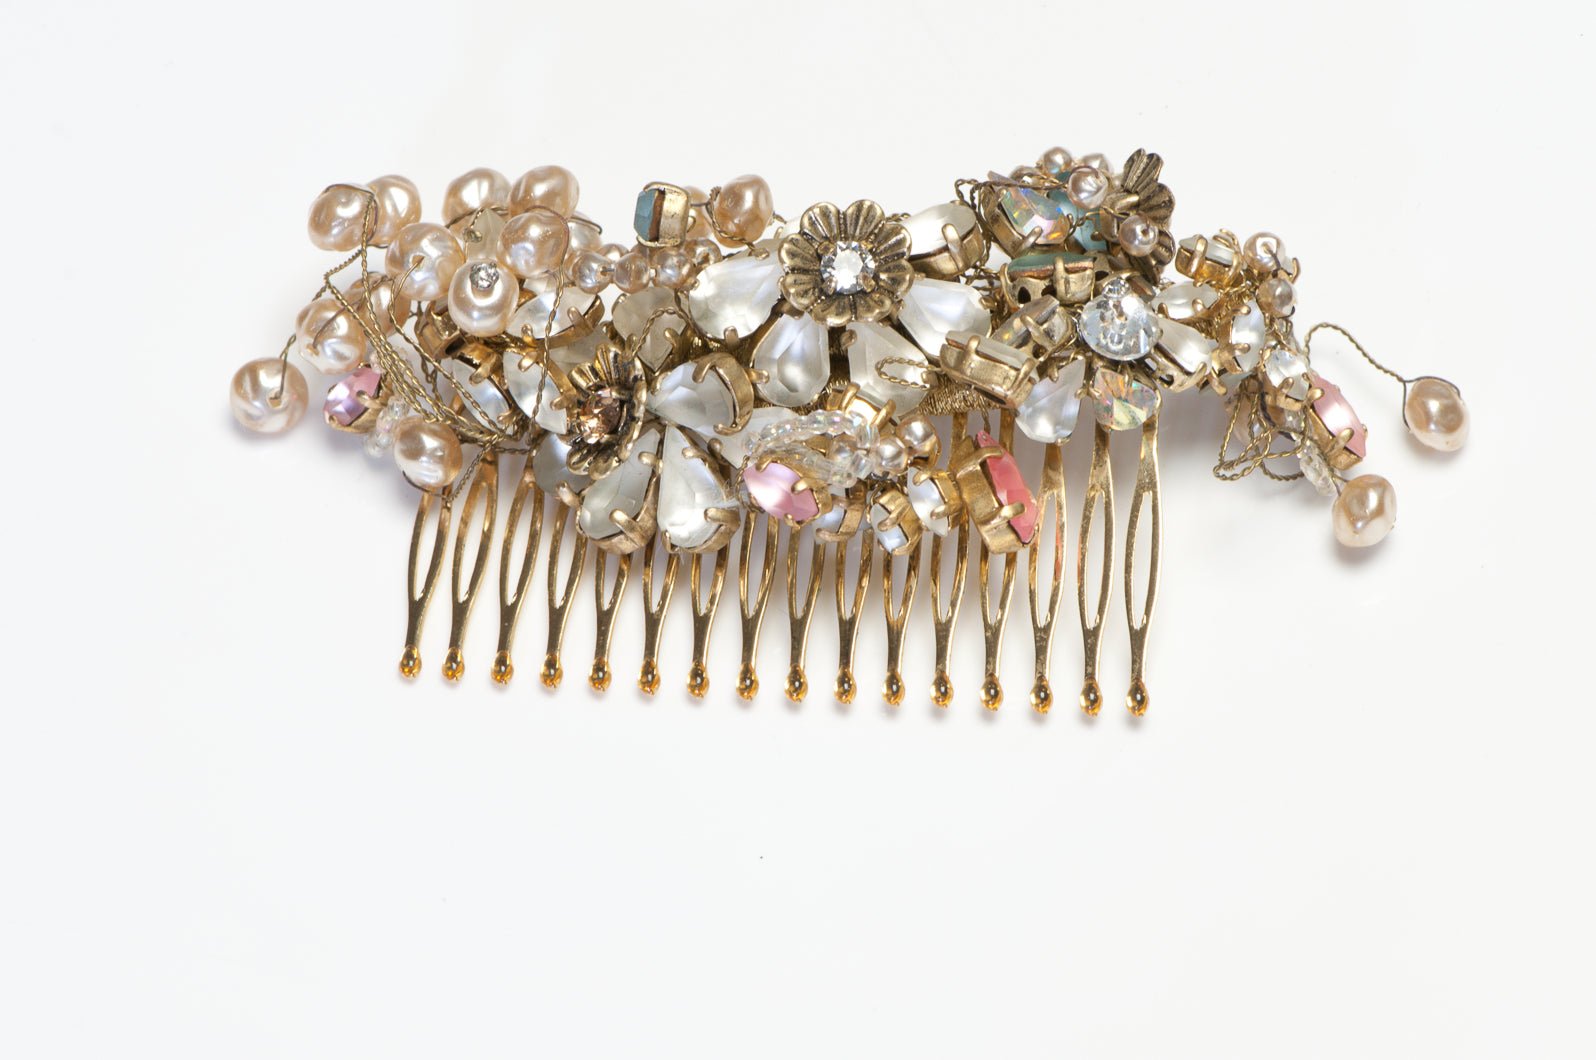 Vintage Christian Mariee Lacroix Couture Pearl Pink Crystal Flower Hair Comb